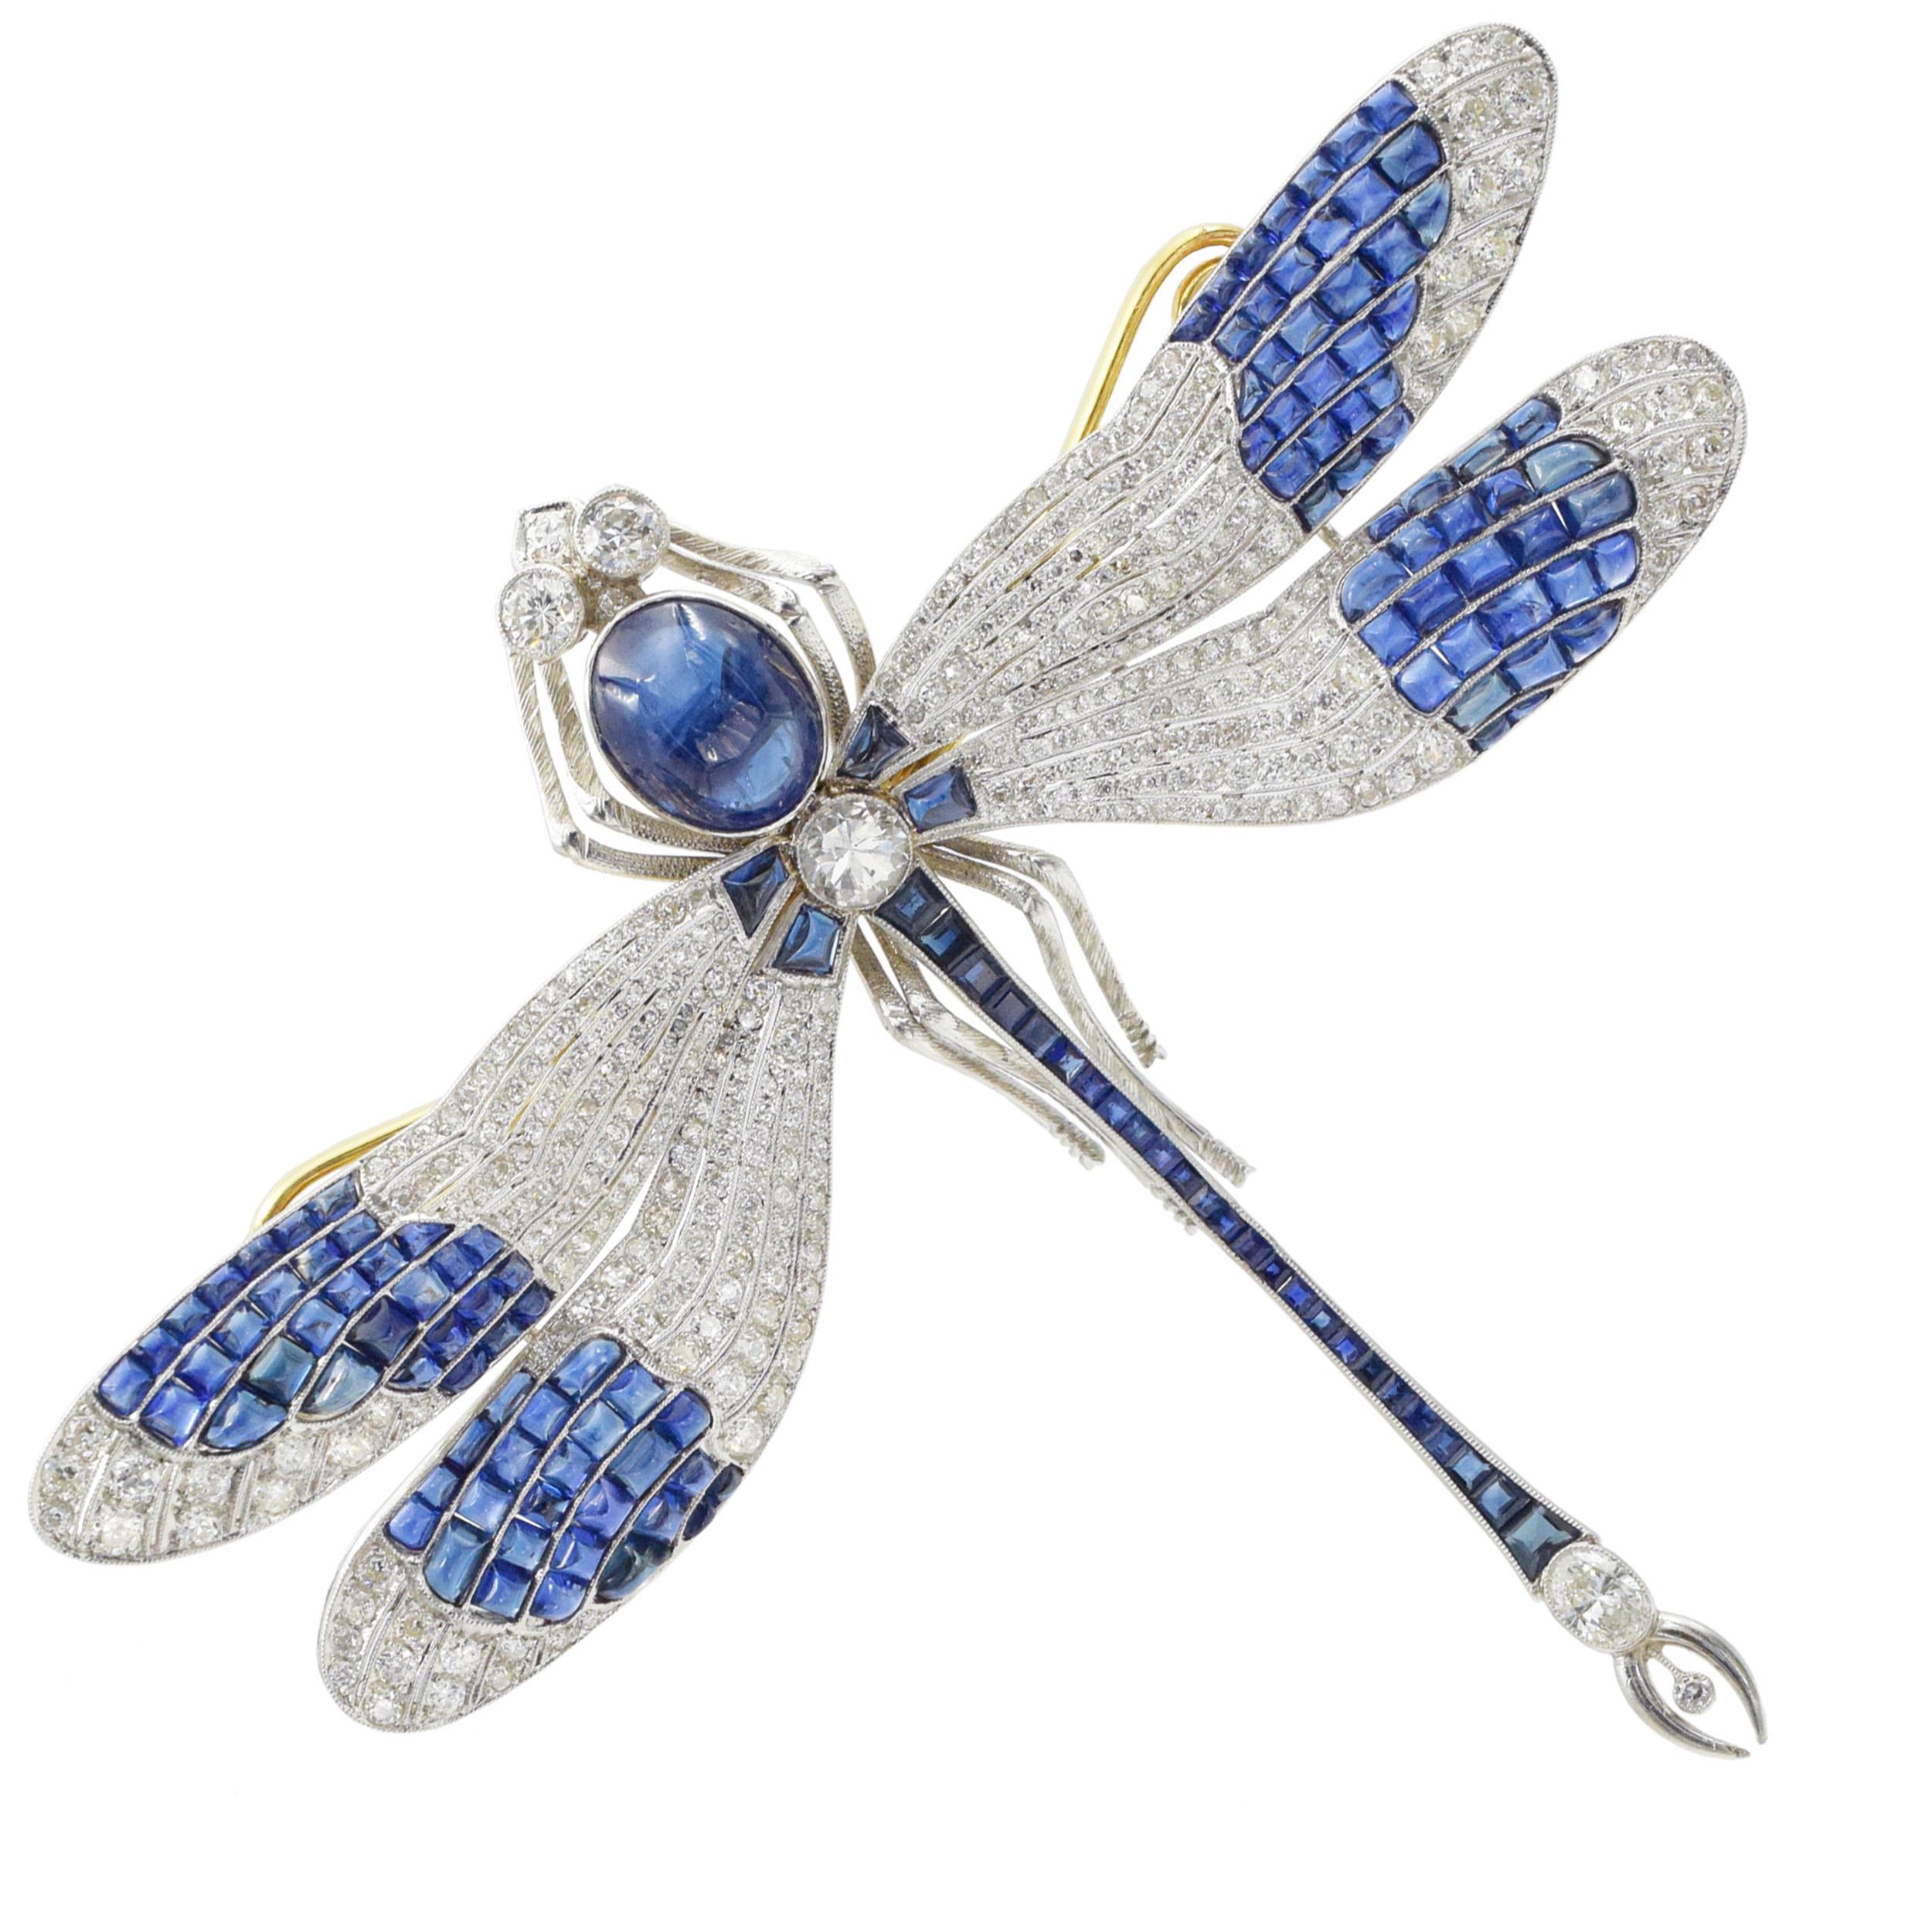 Platinum, Gold, Cabochon Sapphire and Diamond
Dragonfly Brooch This brooch has a center oval cabochon sapphire approx. 9.80 carats., one oval, 3 round and transitonal -cut diamonds ap. 1.60 carats, old-mine and
single-cut diamonds ap. 4.50 carats.,